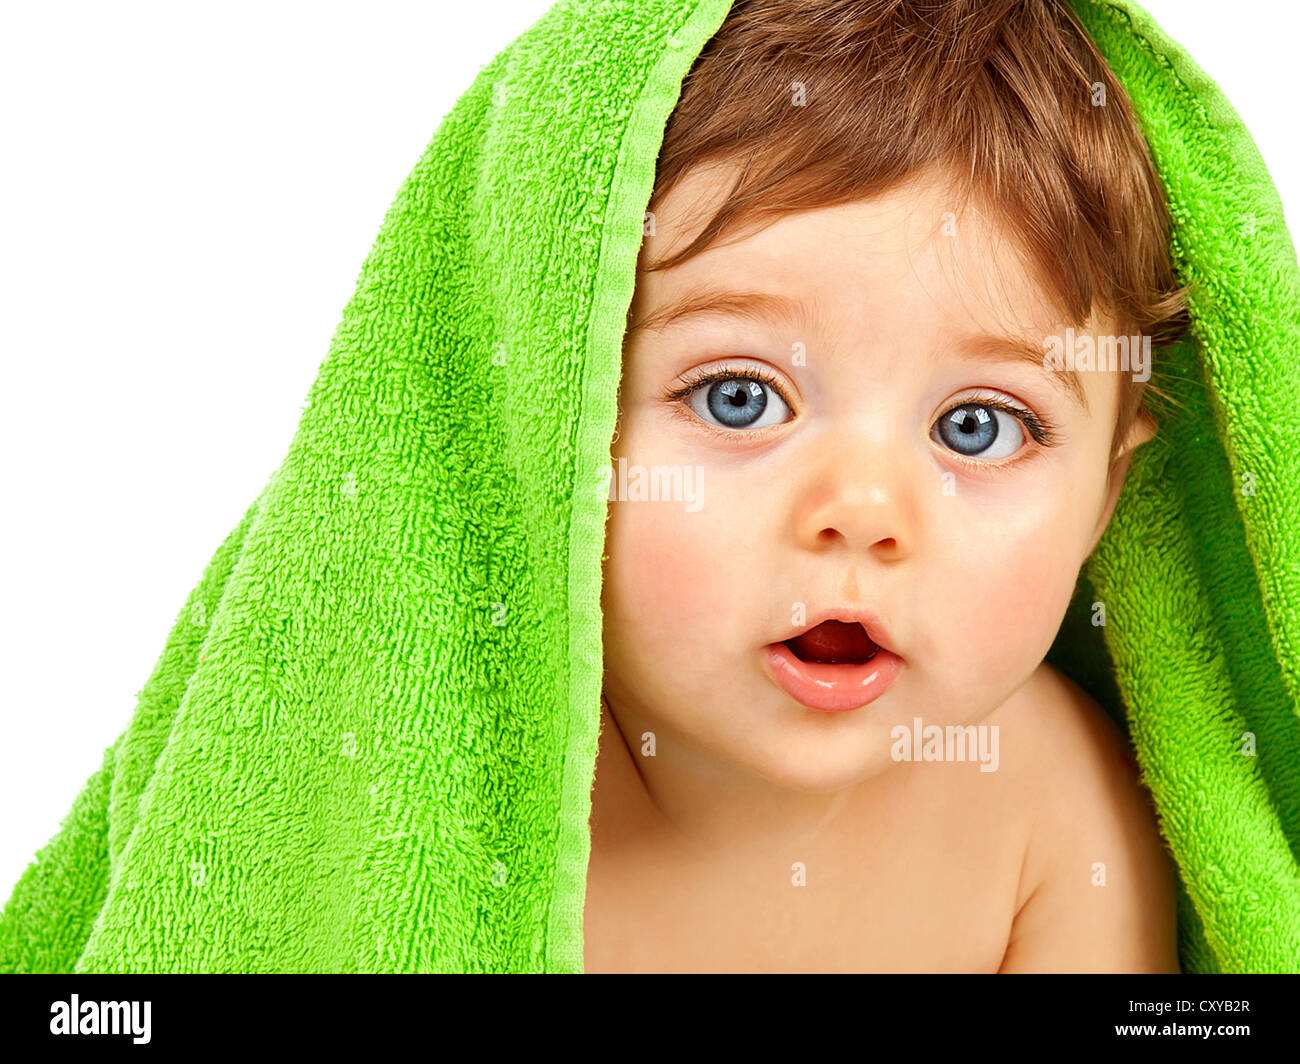 Image of cute baby boy covered green towel isolated on white background,  closeup portrait of cheerful kid with blue eyes Stock Photo - Alamy